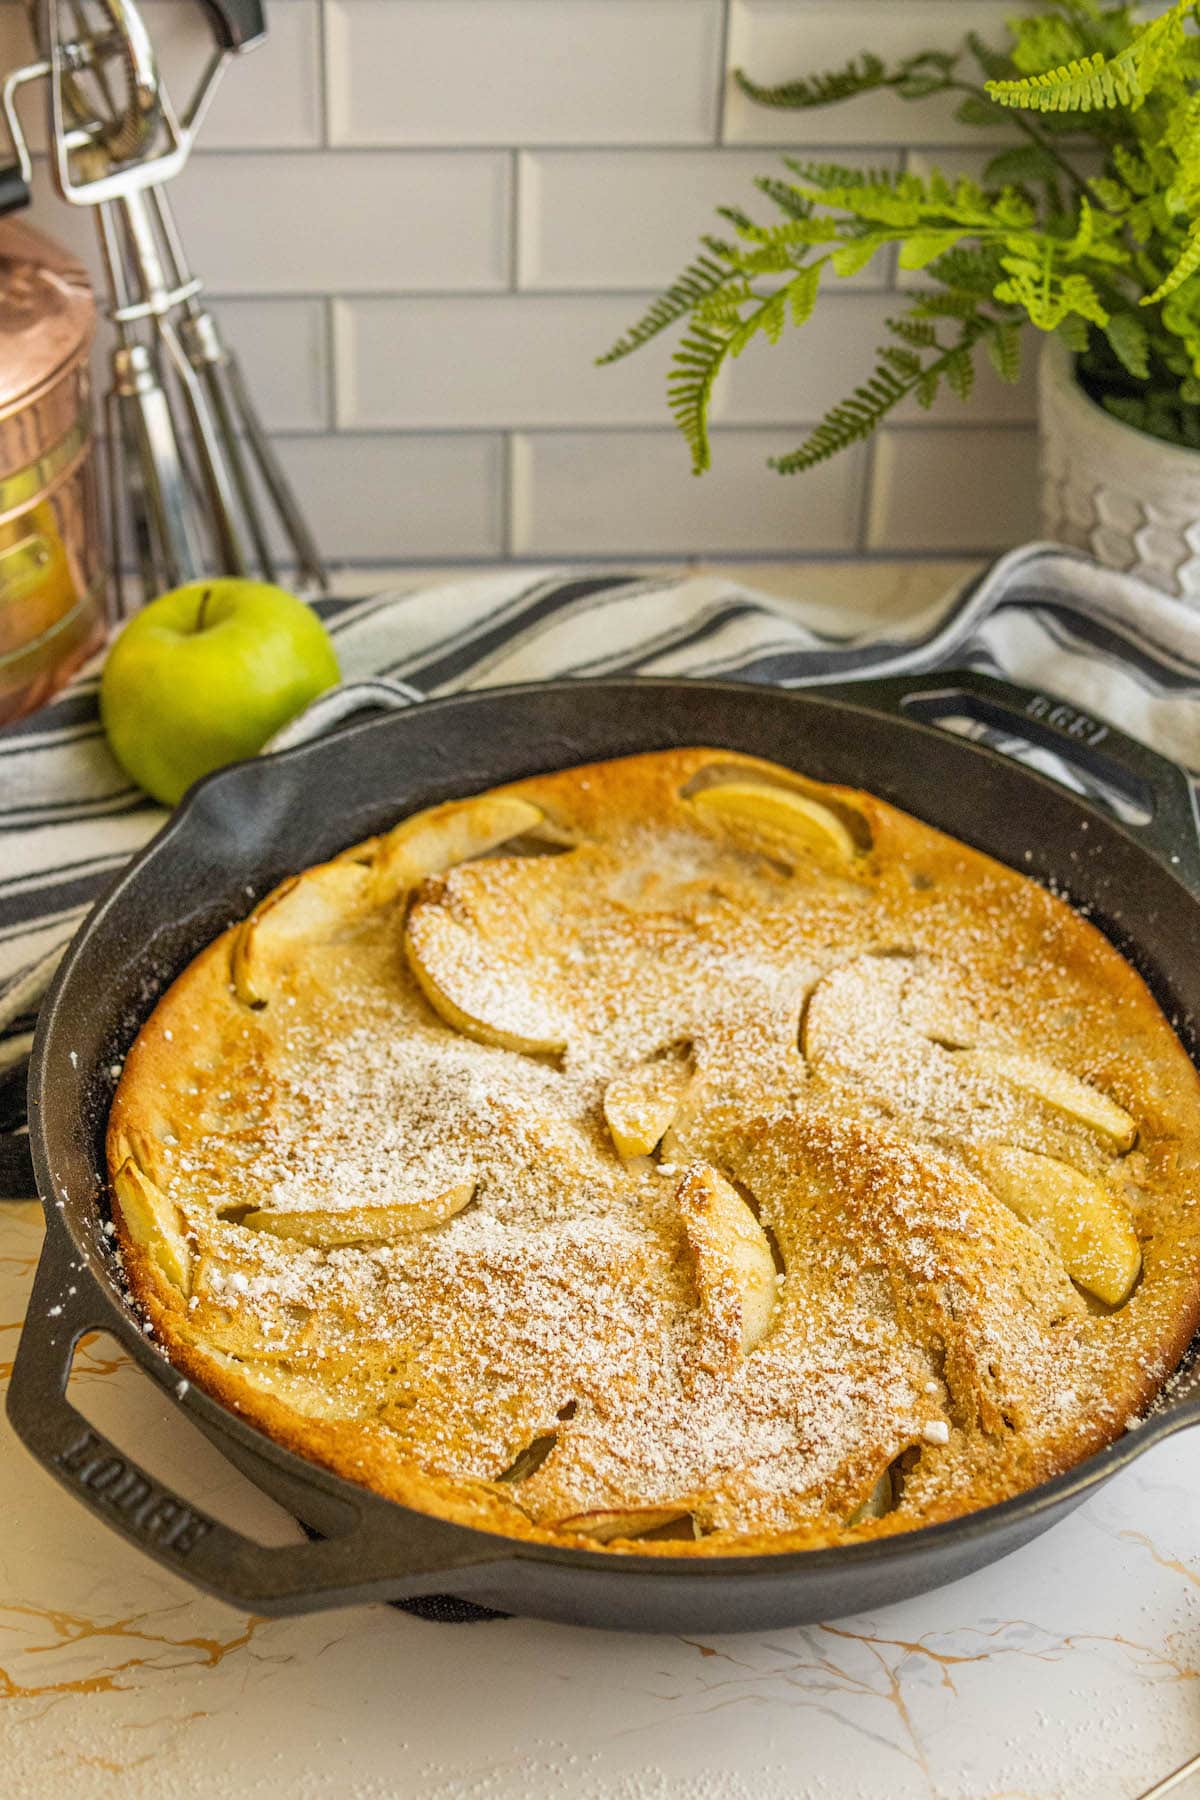 picture of a pancake with apples and powdered sugar on it in a cast iron skillet